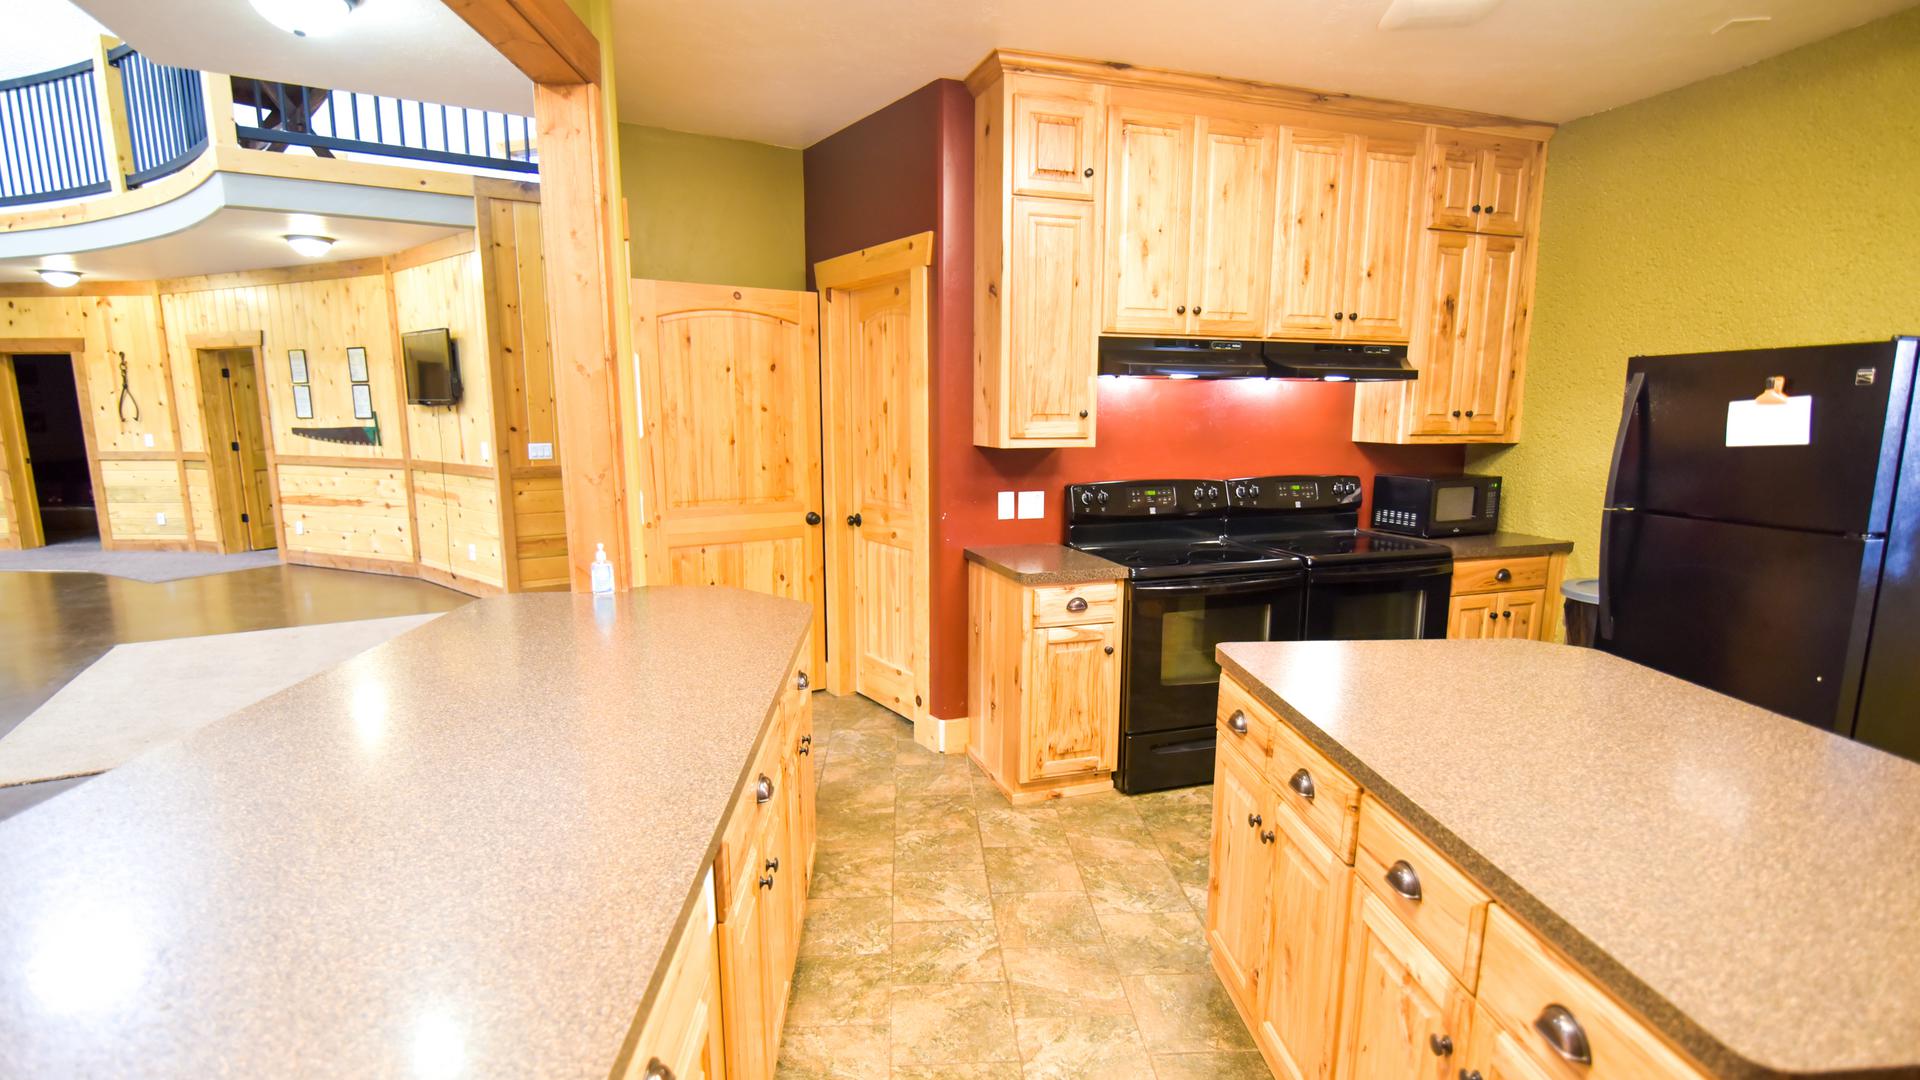 Two ranges and two refrigerators in the large kitchen.